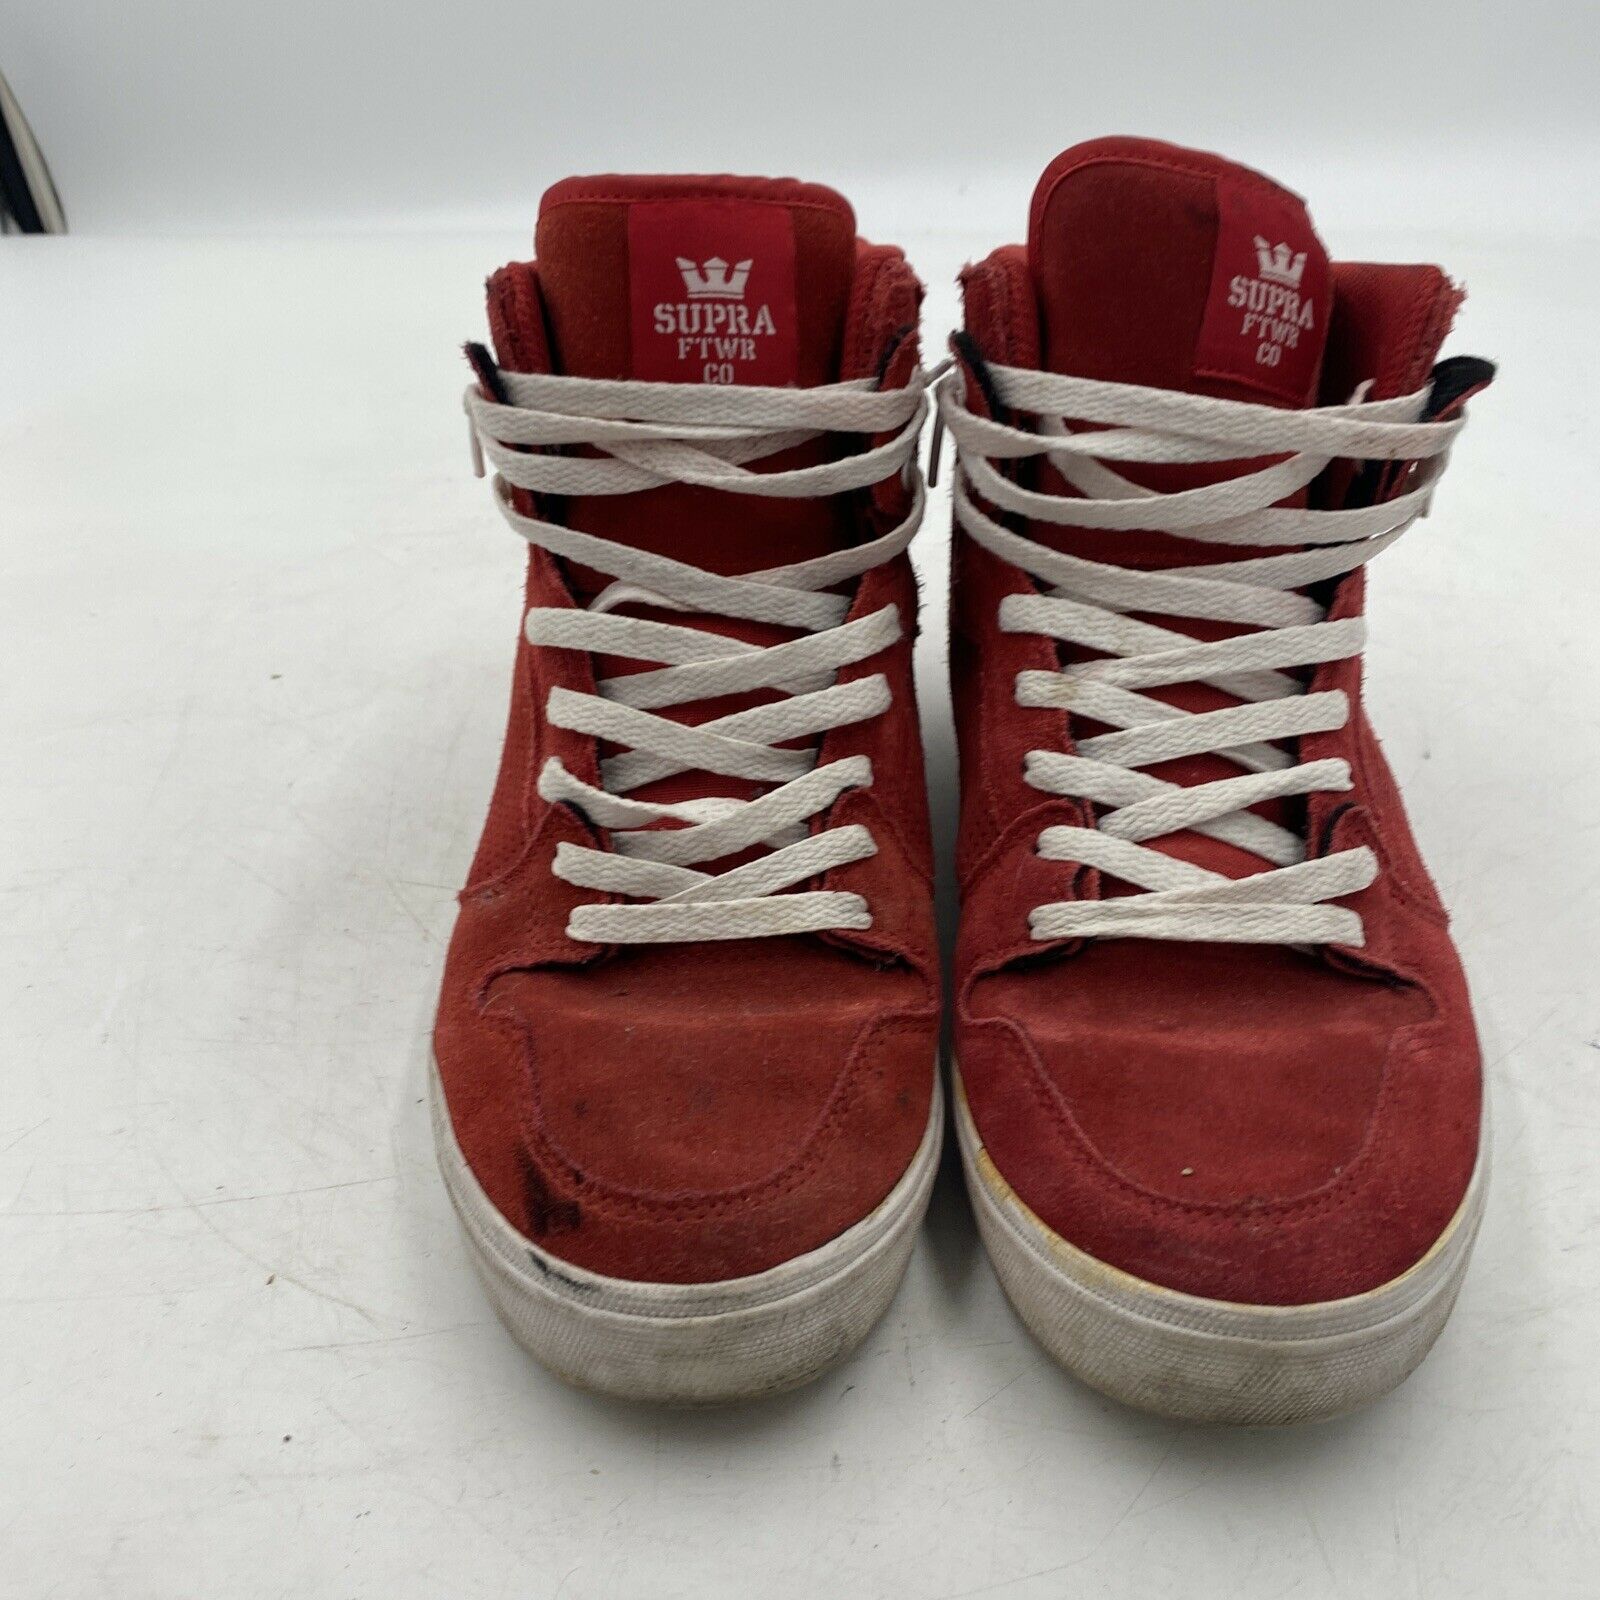 SUPRA Skateboarding Shoes Size 10 (214 IR08) Red High Tops